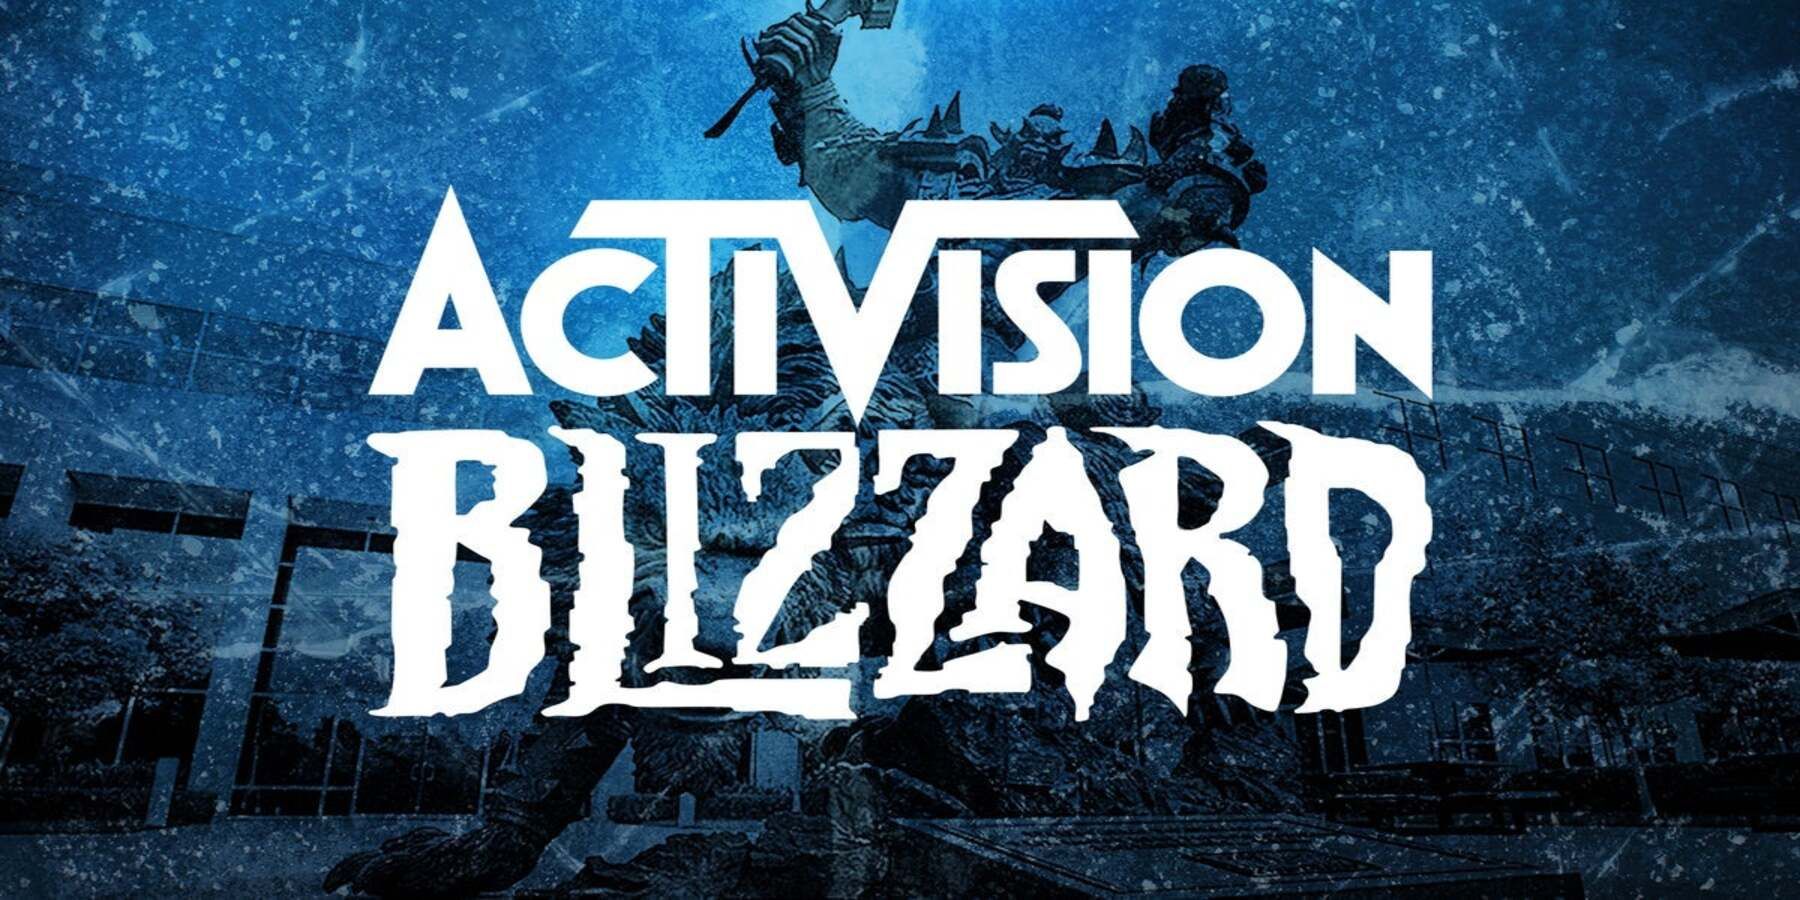 activision-blizzard-hires-former-disney-exec-to-oversee-hr-a_y4s6 (1)